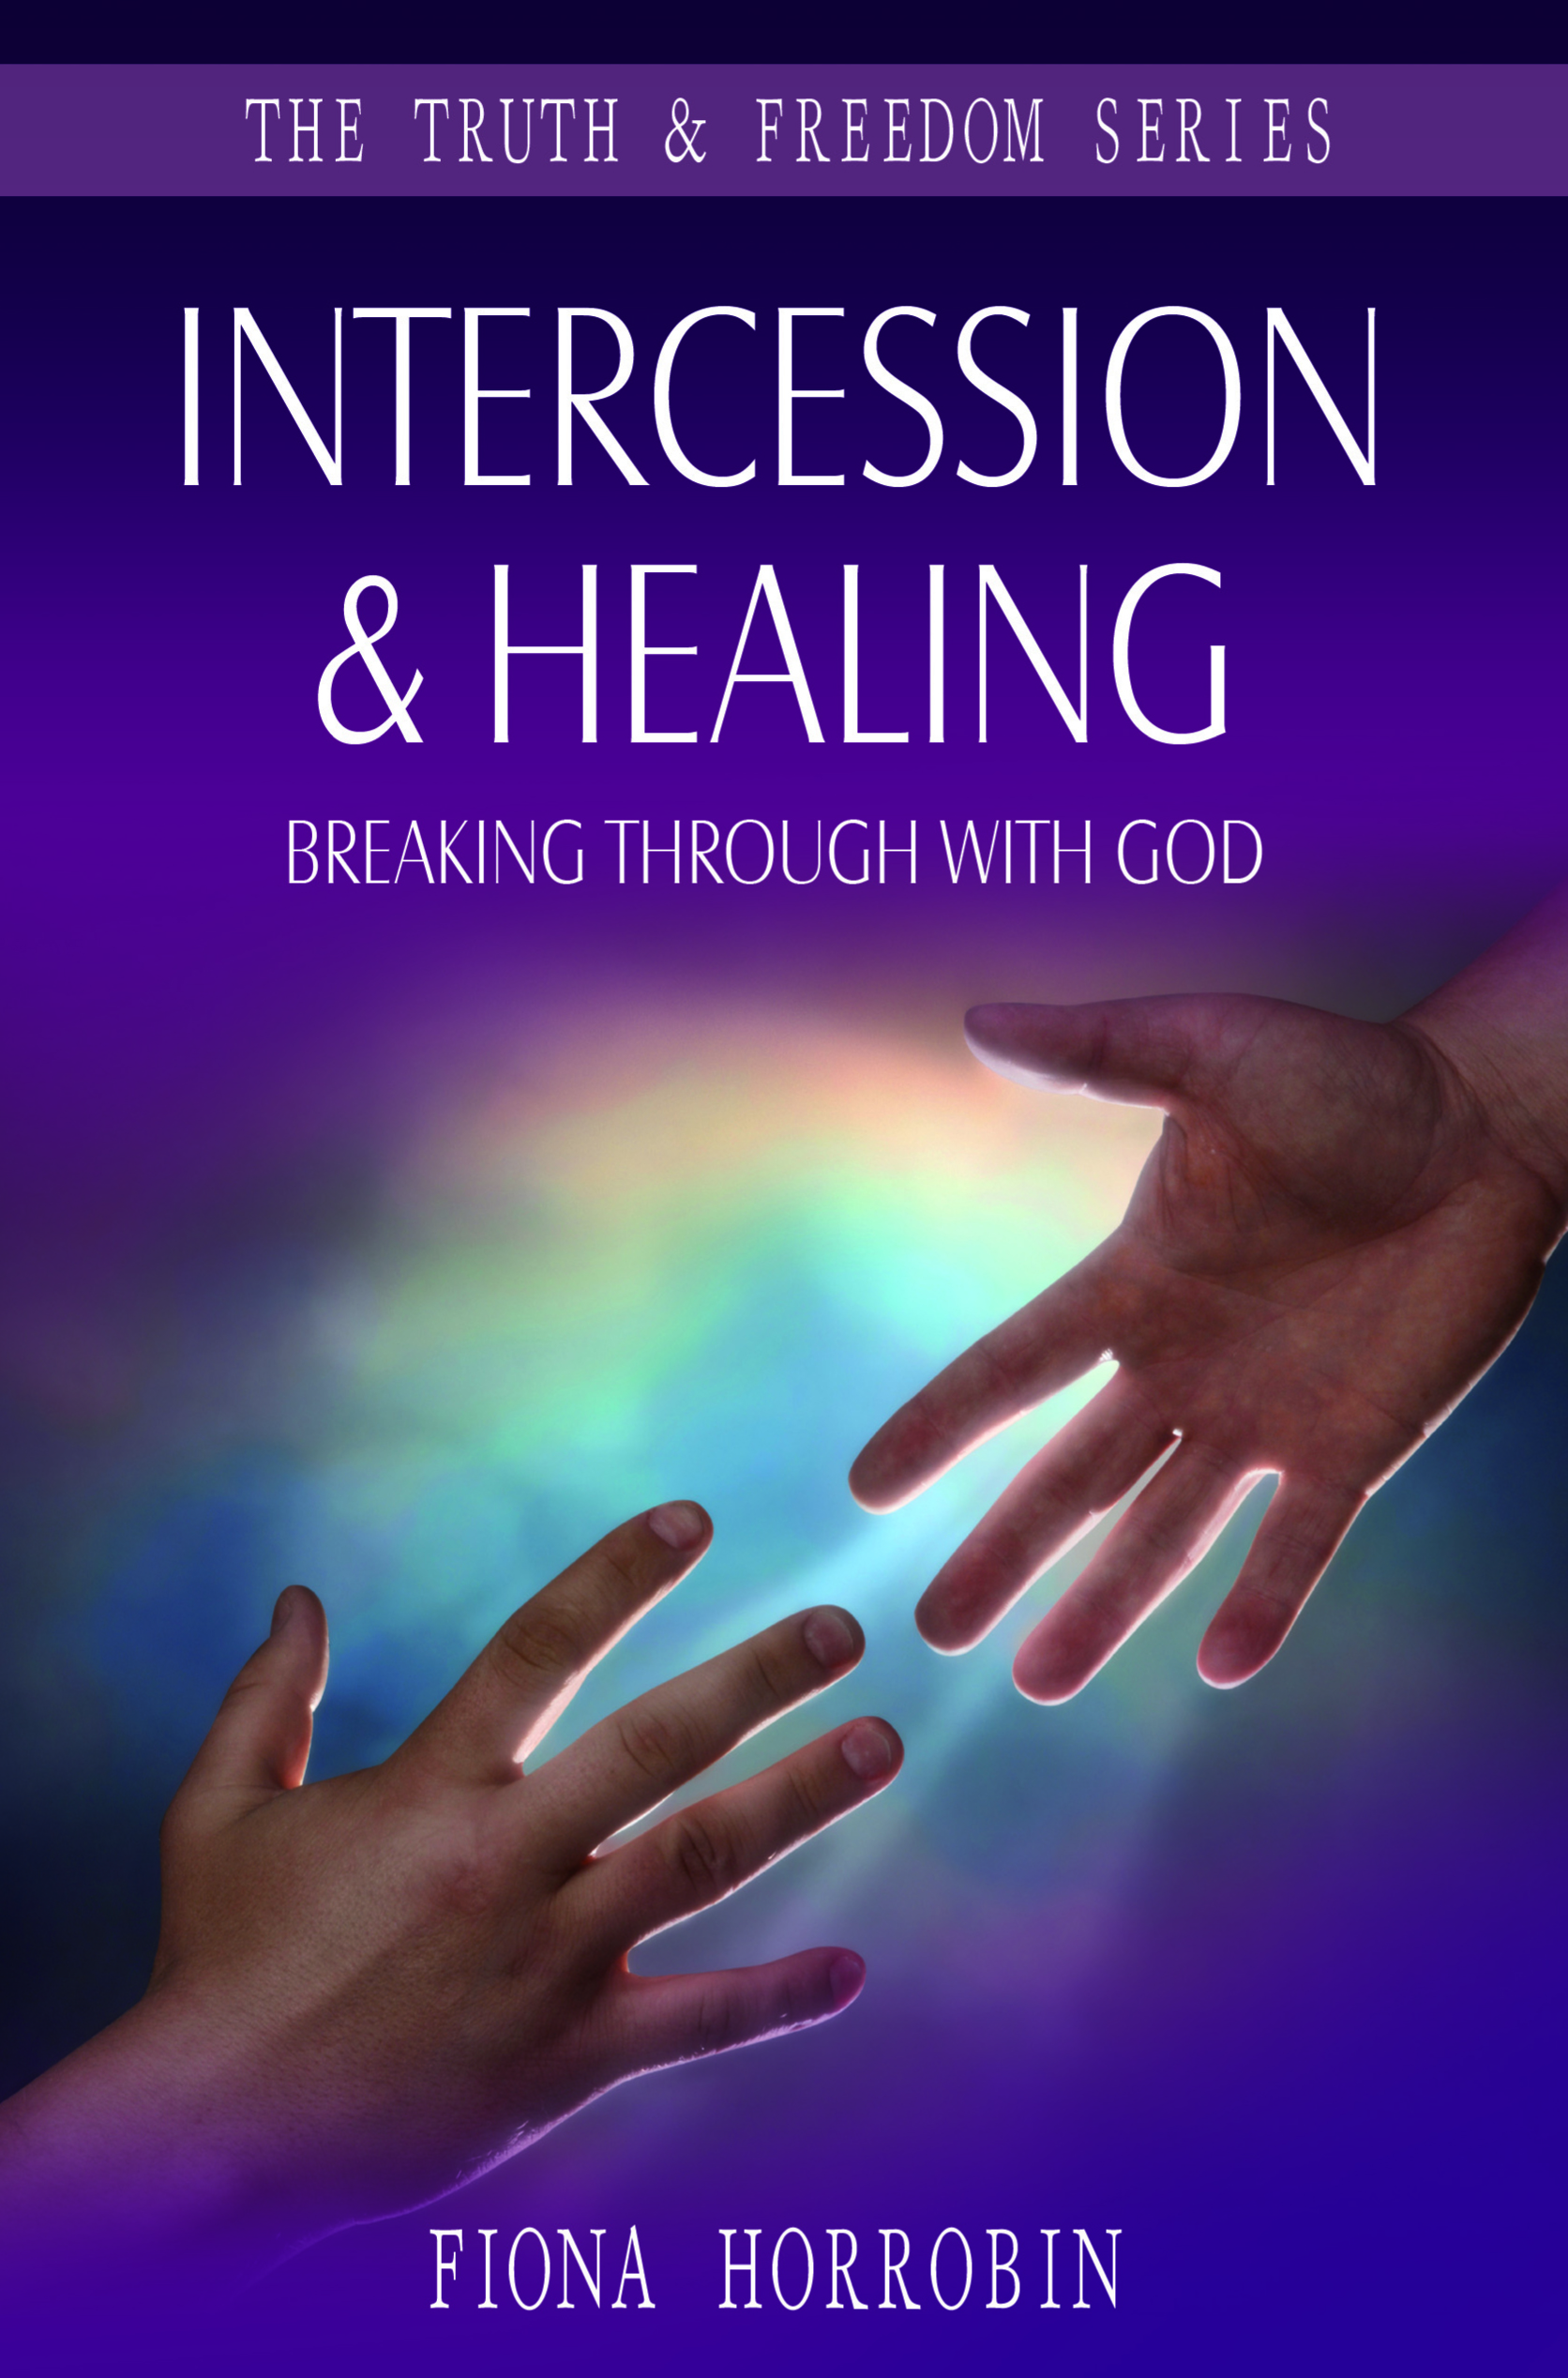 Intercession & Healing - Breaking through with God